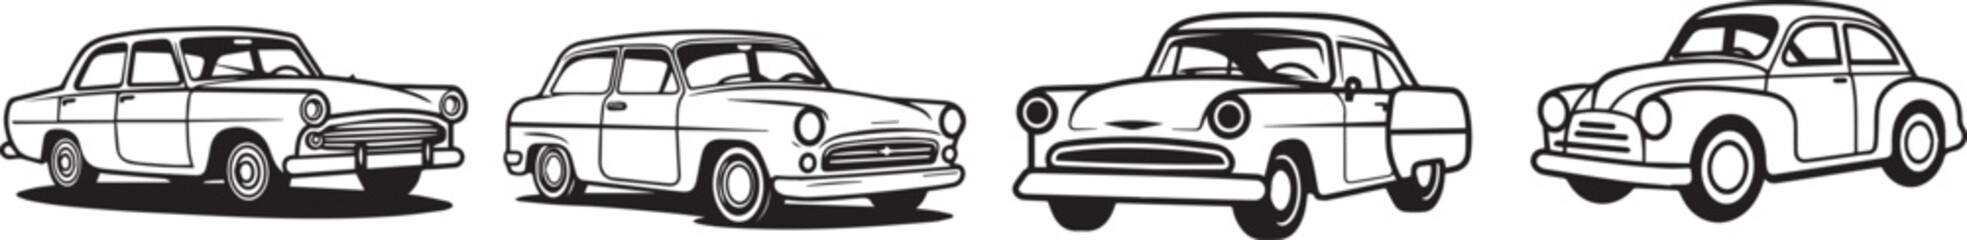 Old Car line art vector icon isolated on a white background